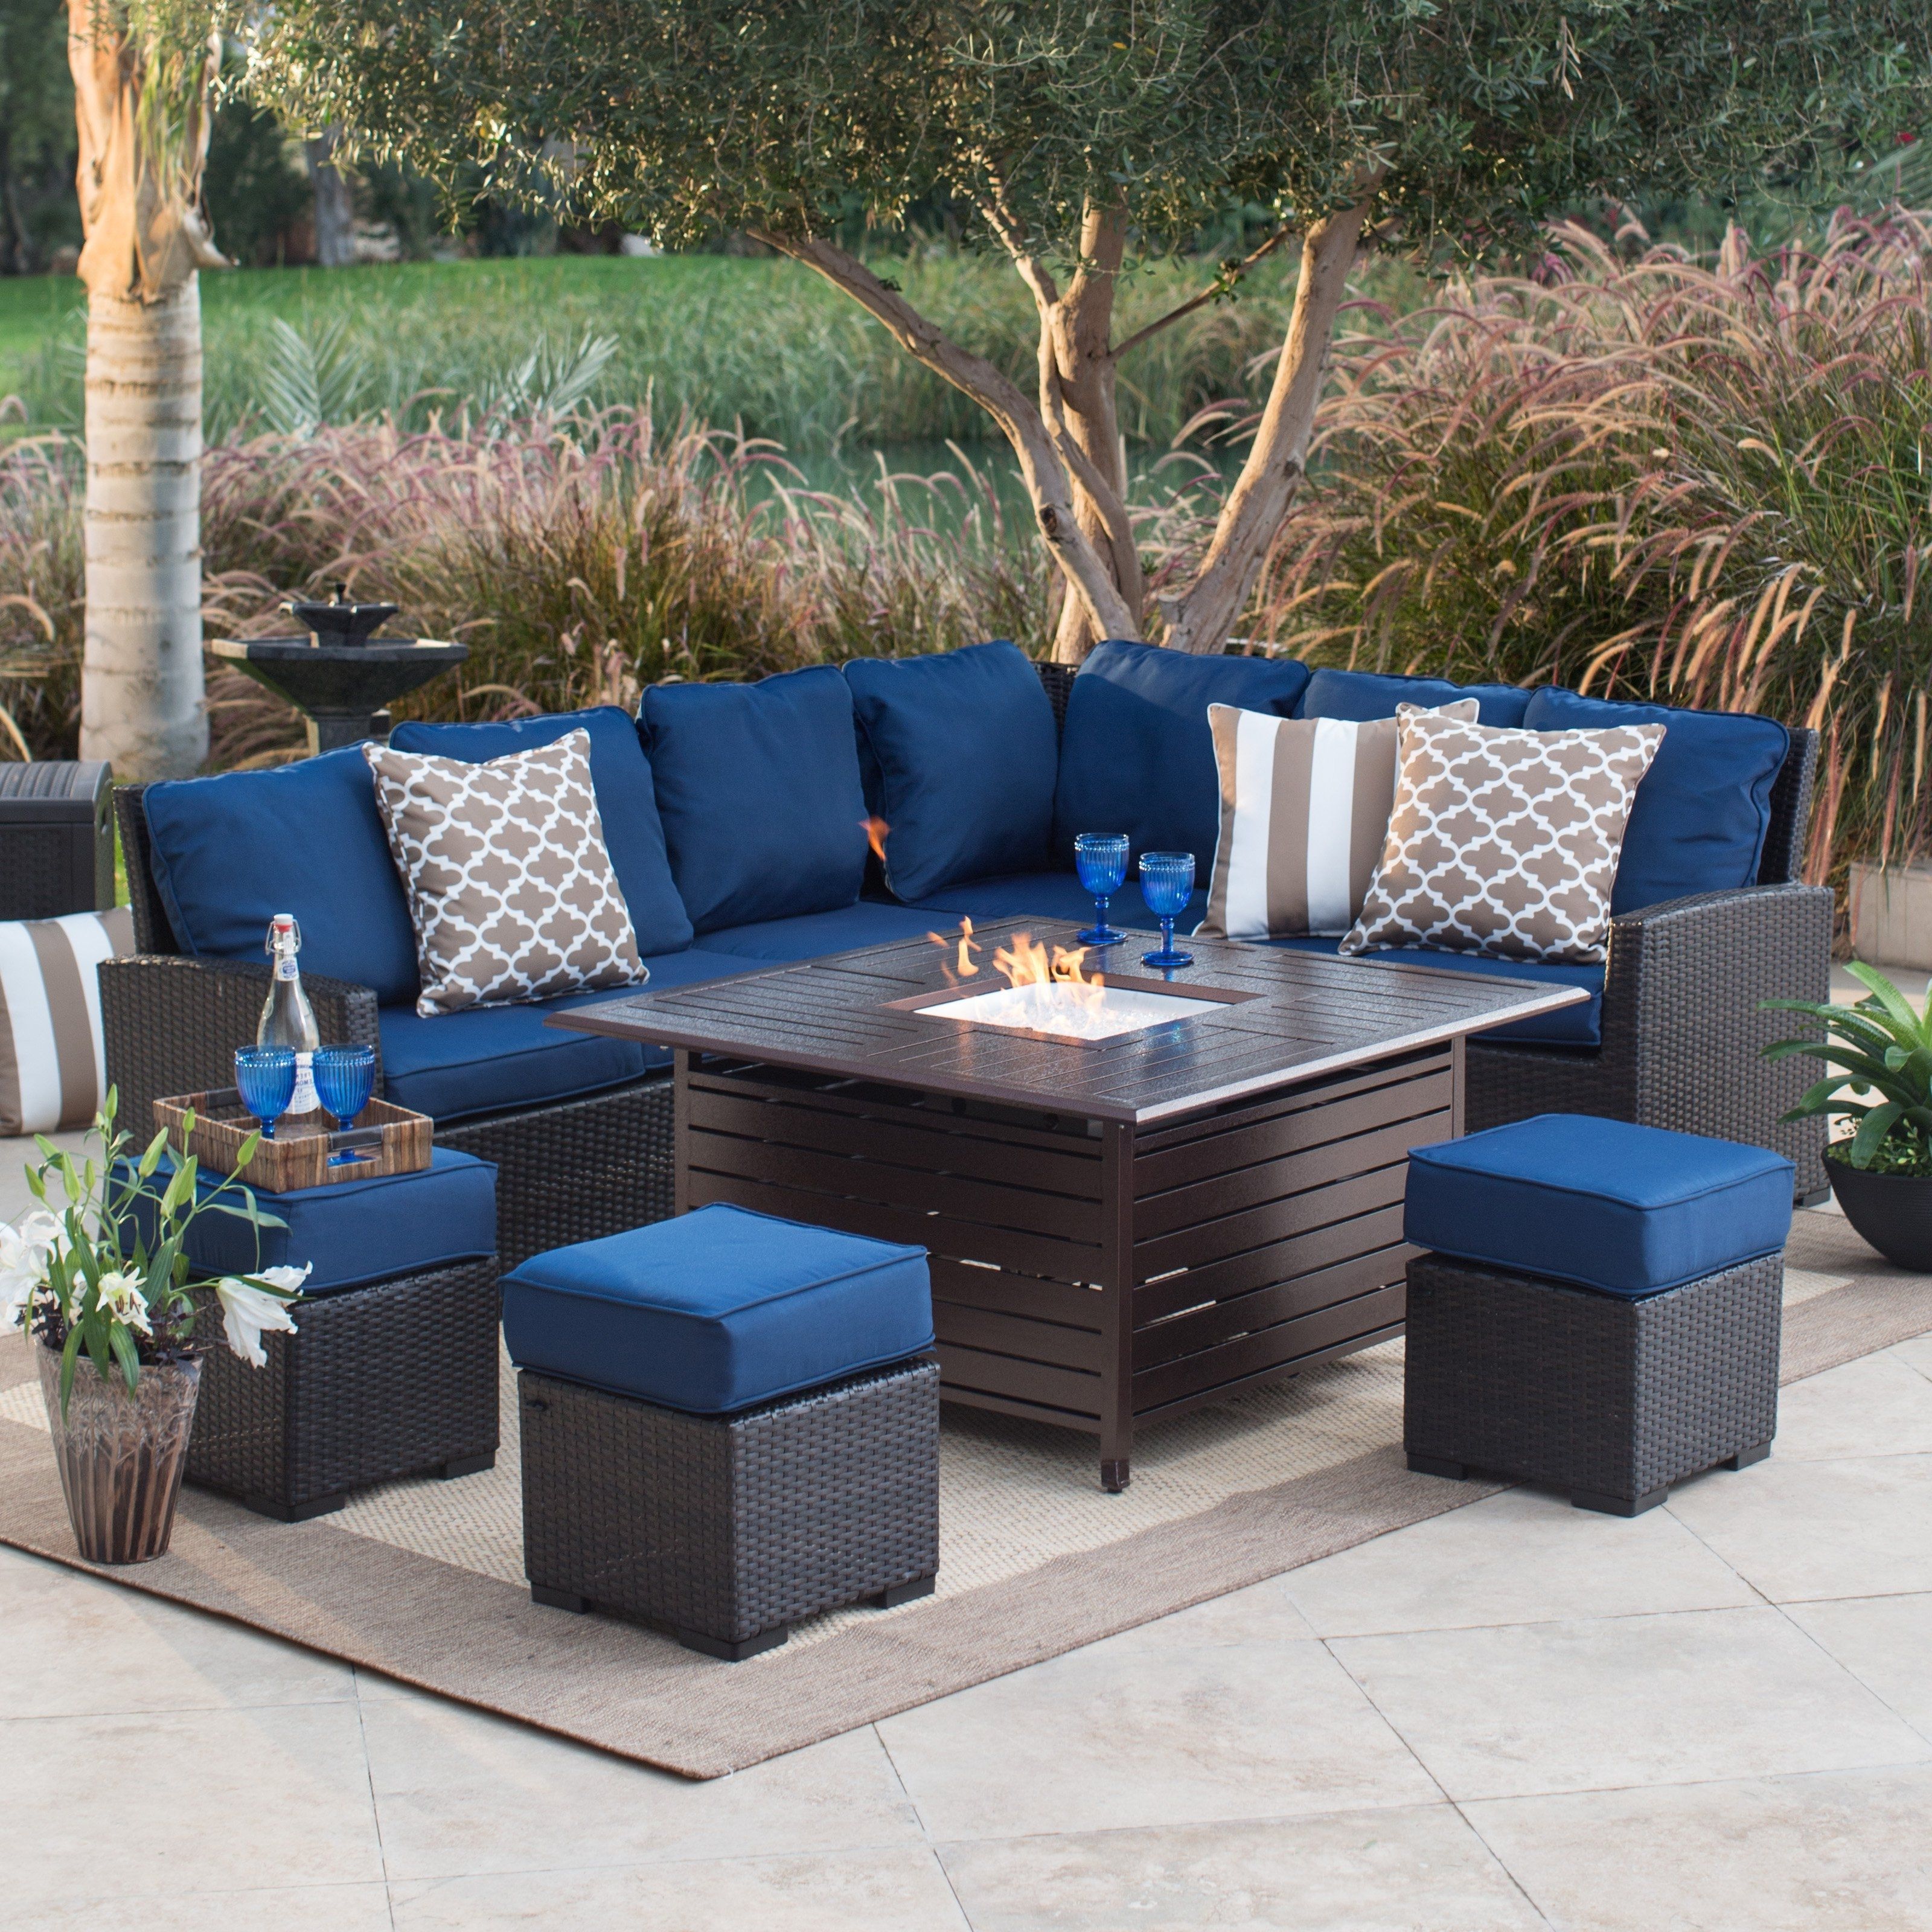 Fire Pit Patio Sets Hayneedle Chat Set Cover Canada Captivating With Favorite Patio Furniture Conversation Sets With Fire Pit (View 1 of 20)